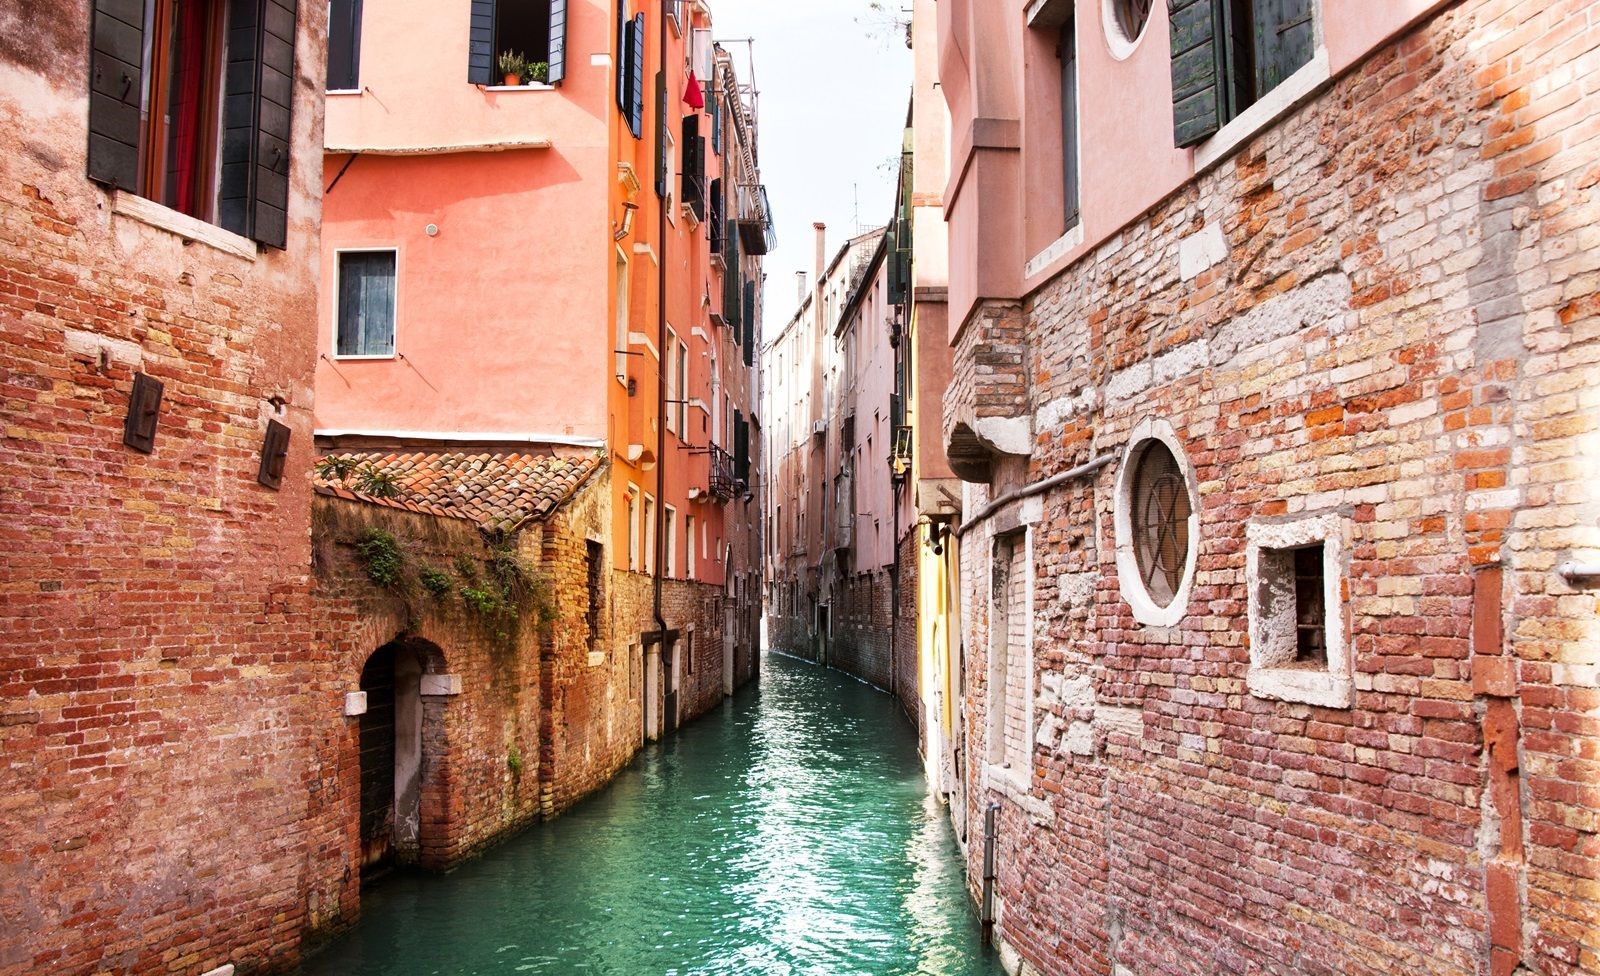 Venice Attractions: Top 14 Attractions - 2019 (with photos)